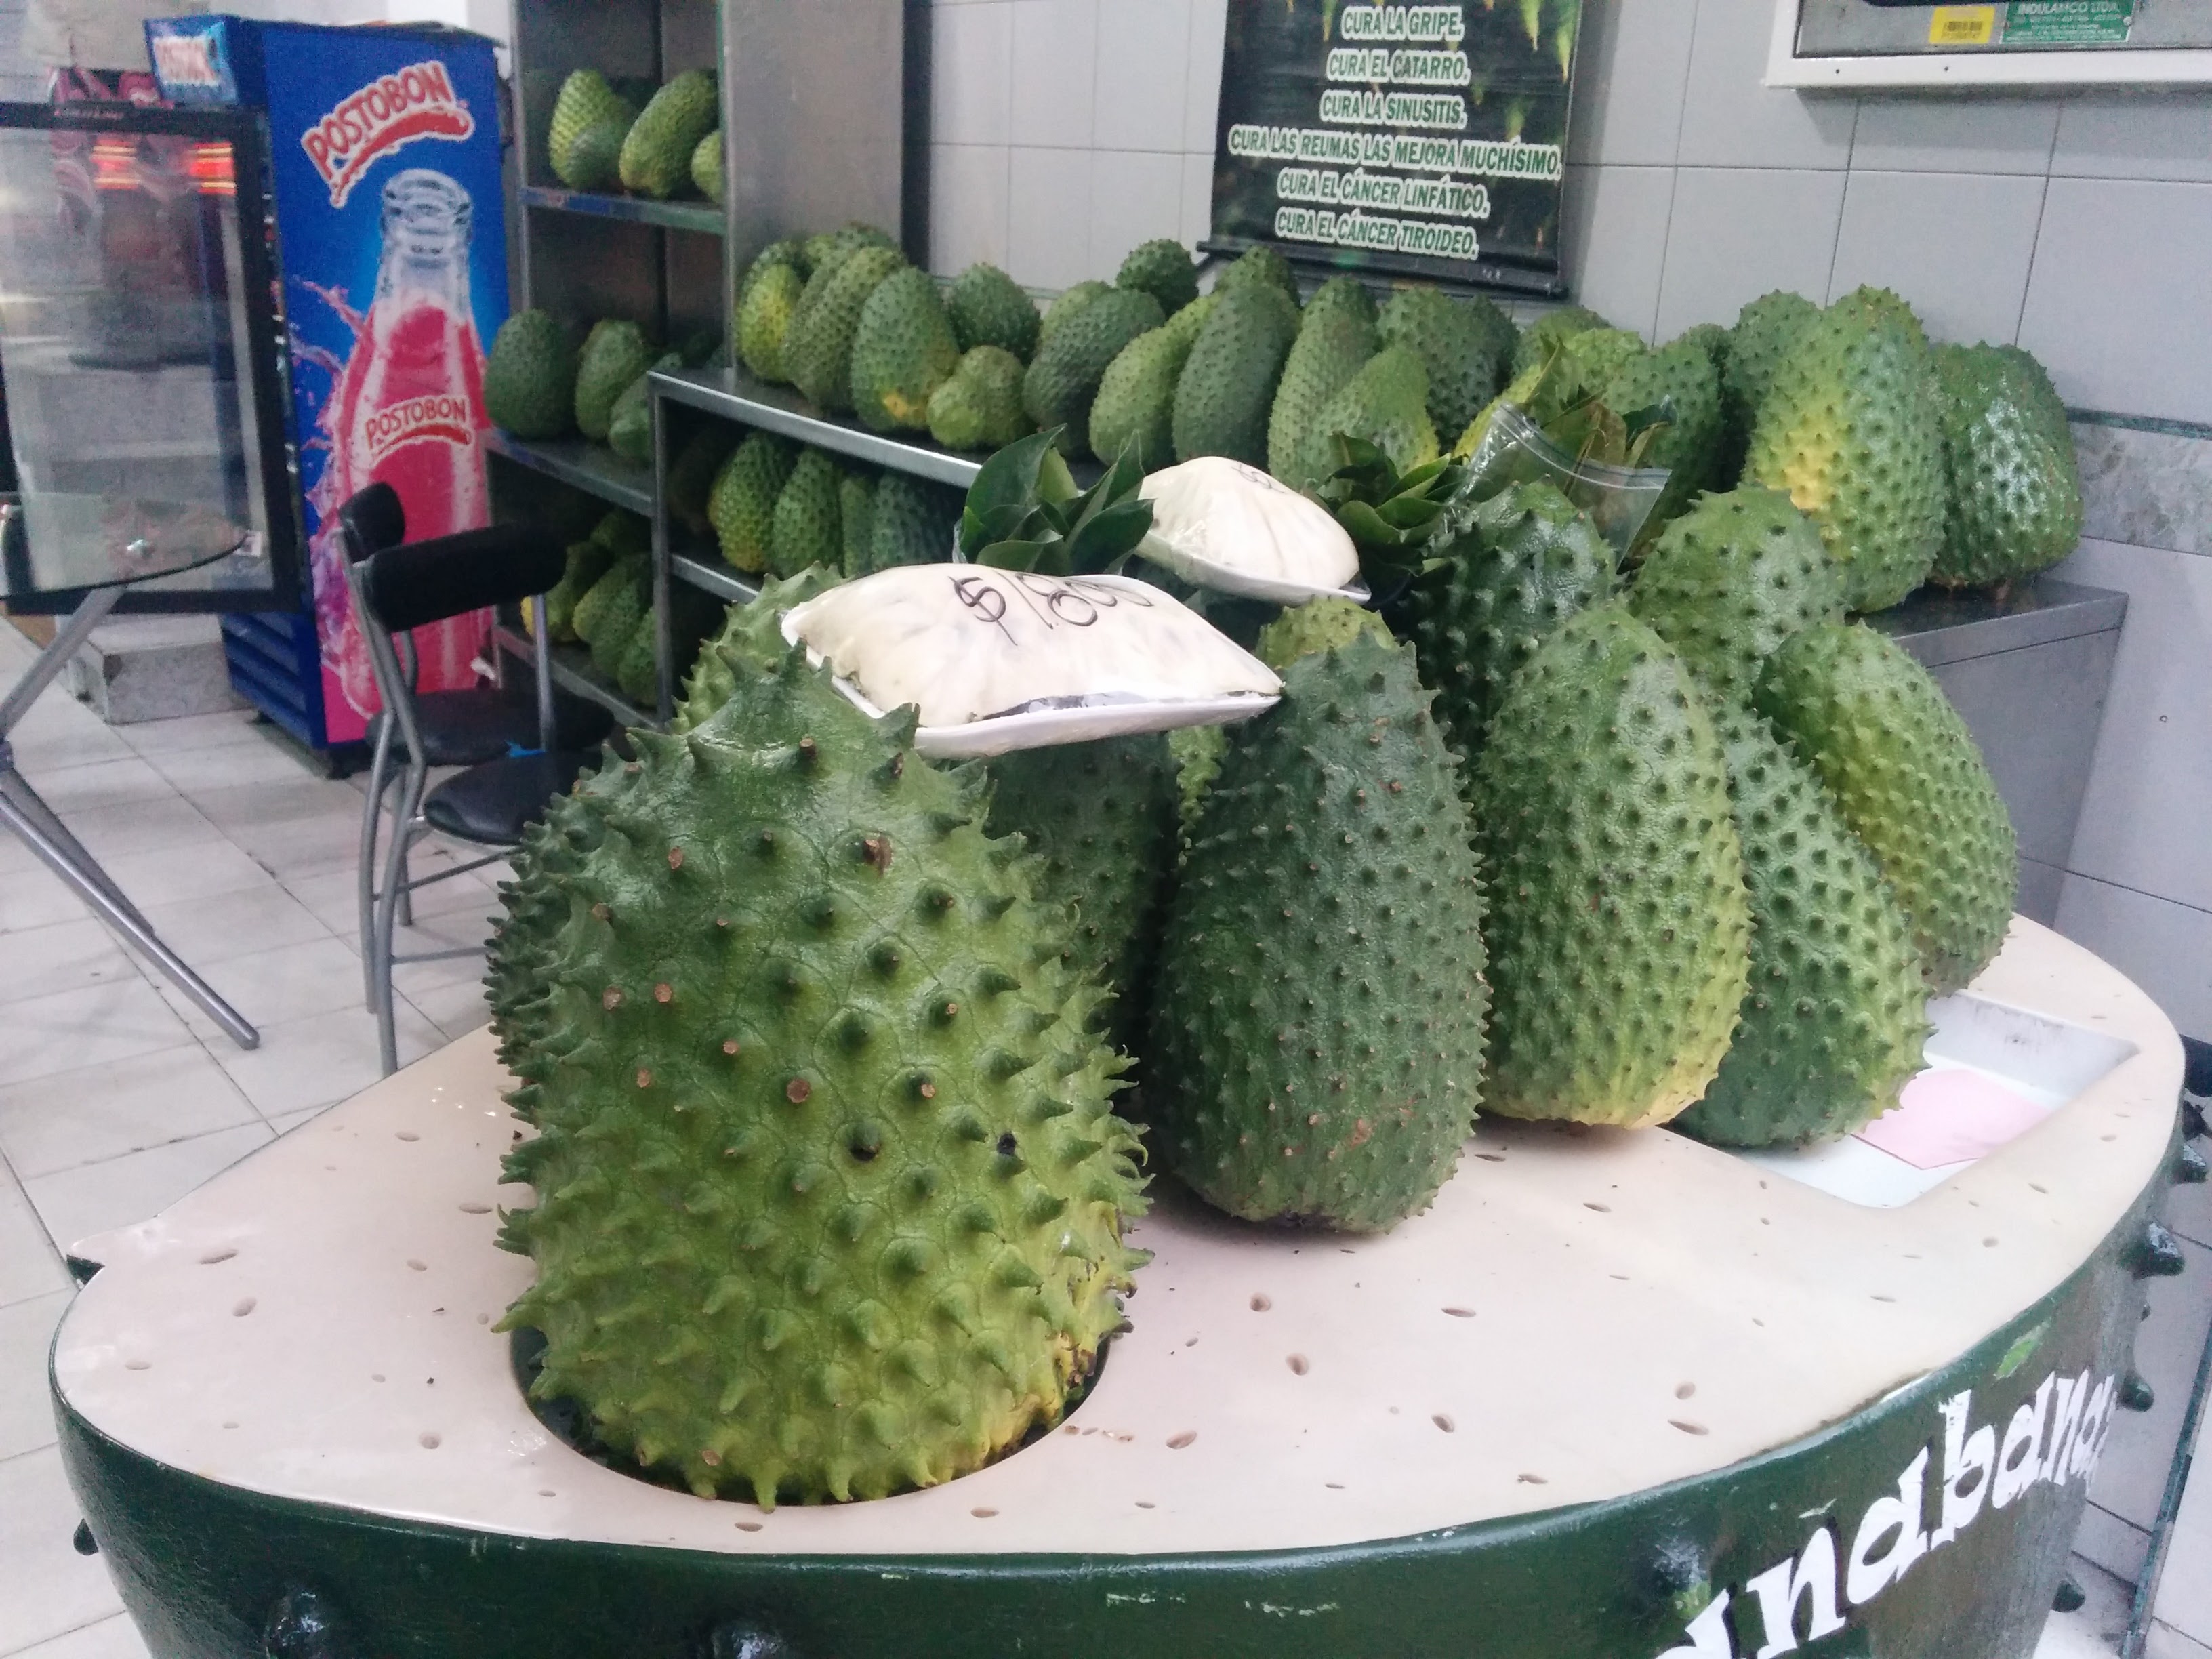 Guanabana - the gua fruit with flavor